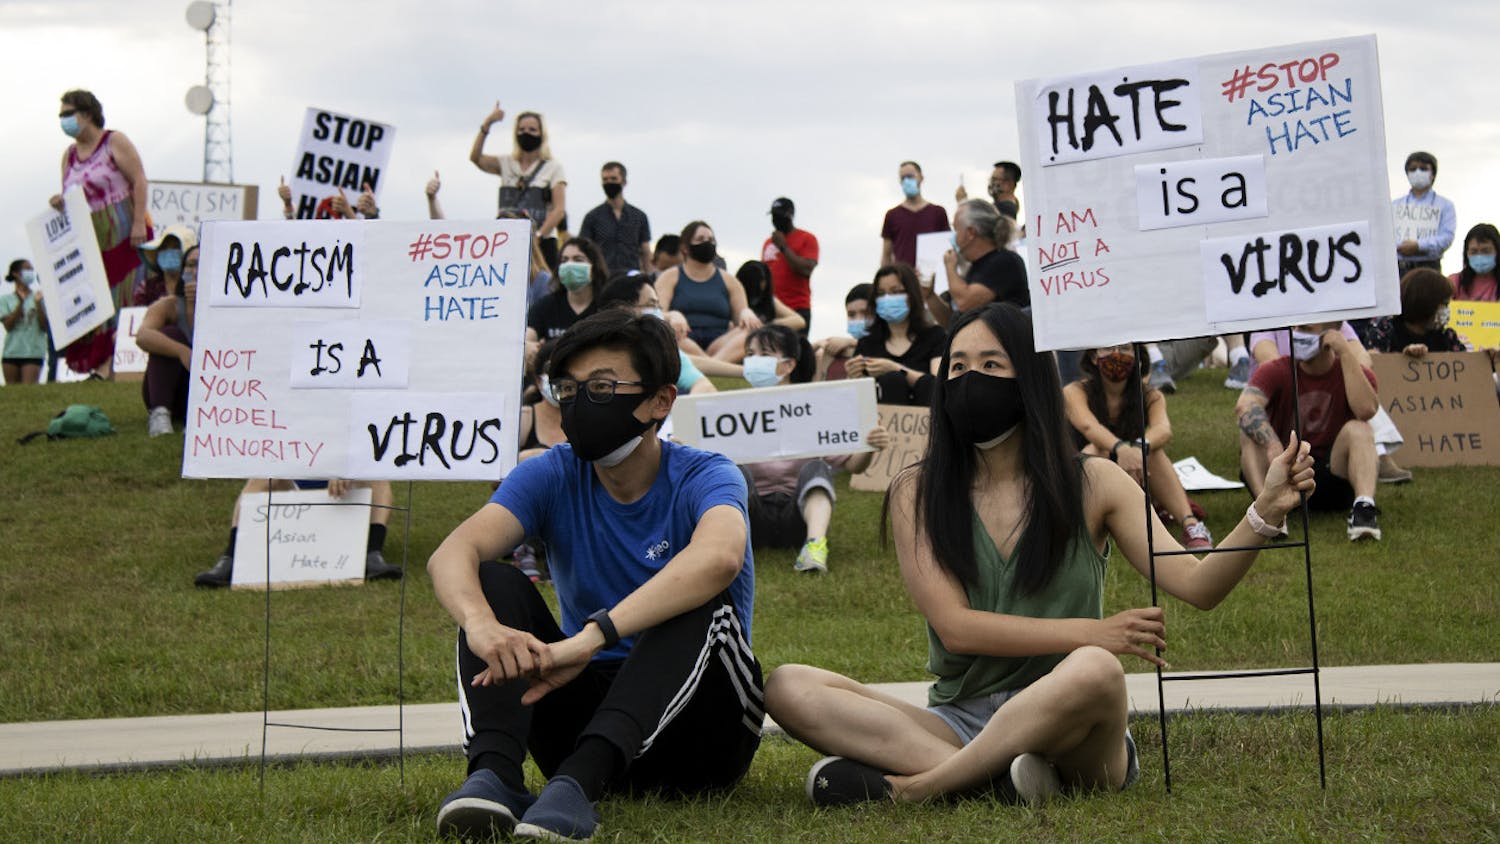 Larry Wang, 29, (left) and Shirley Ai, 28, (right) sit at Depot Park as they listen to speakers during a vigil on Saturday, March 27, 2021. The vigil followed a march from Bo Diddley Plaza, which was held to raise awareness about increasing anti-Asian violence and remember the victims of the shootings that killed eight people in Atlanta.